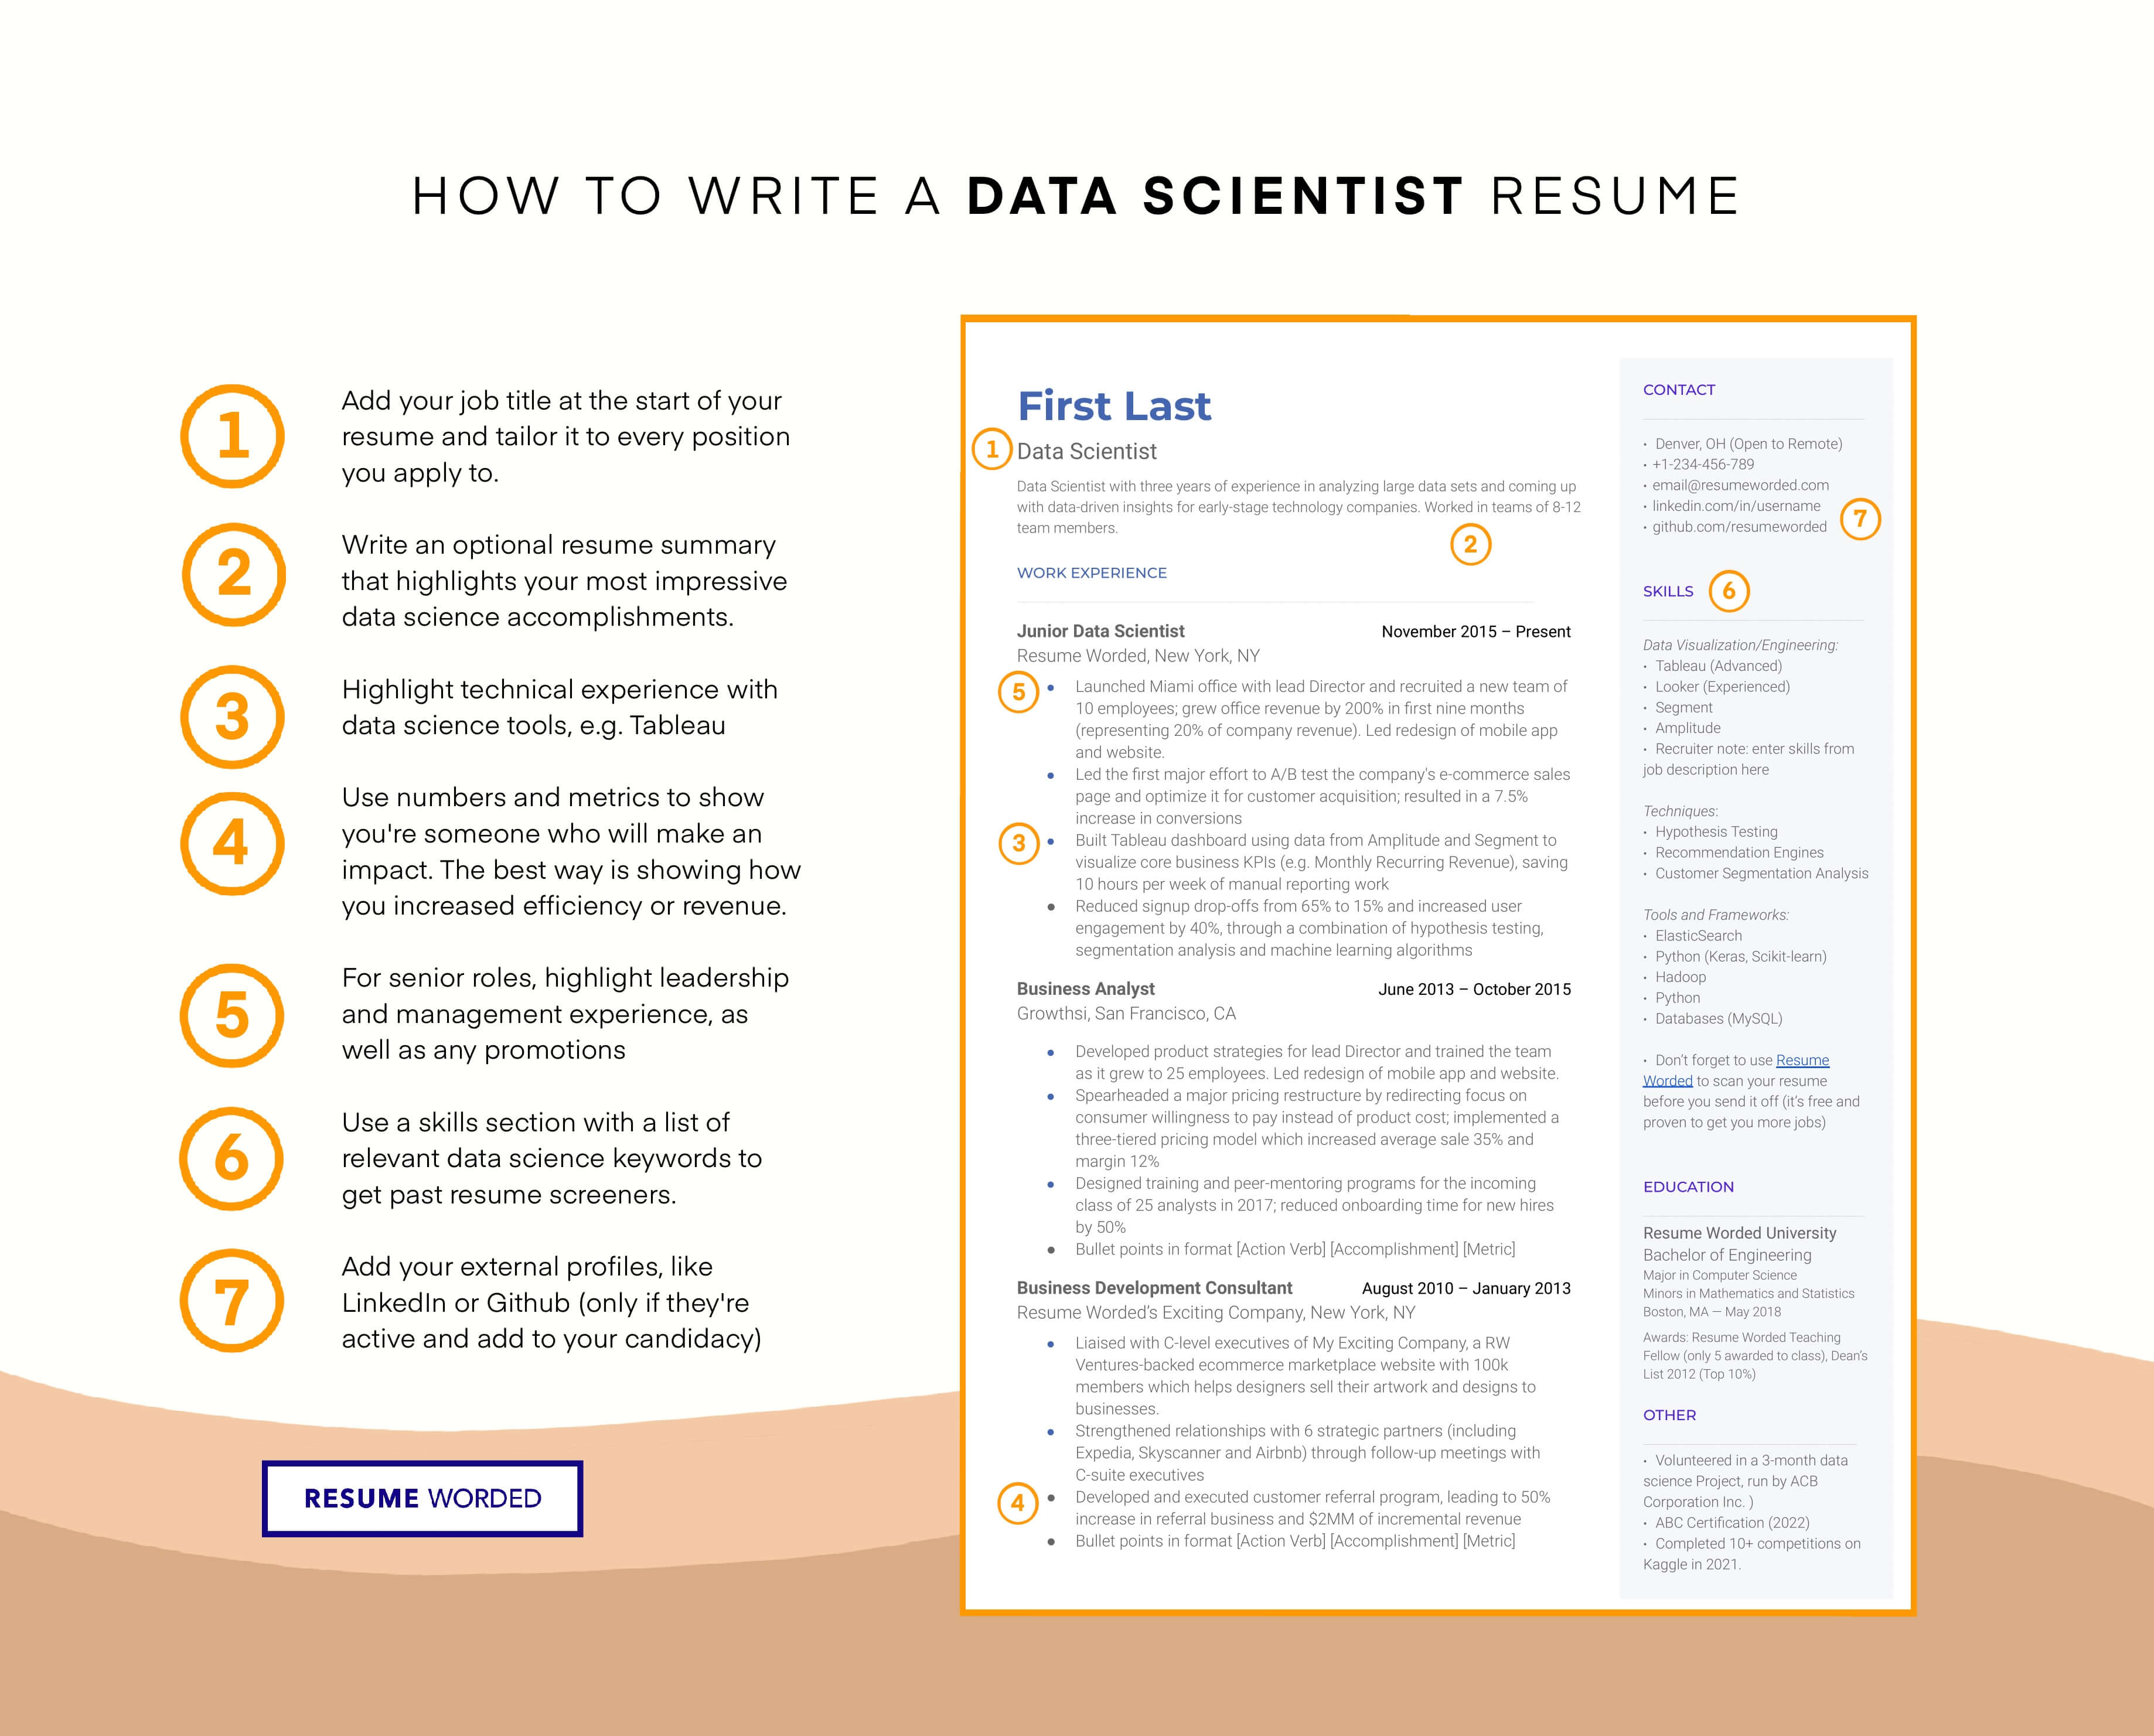 Include data science certifications. - Data Specialist Resume